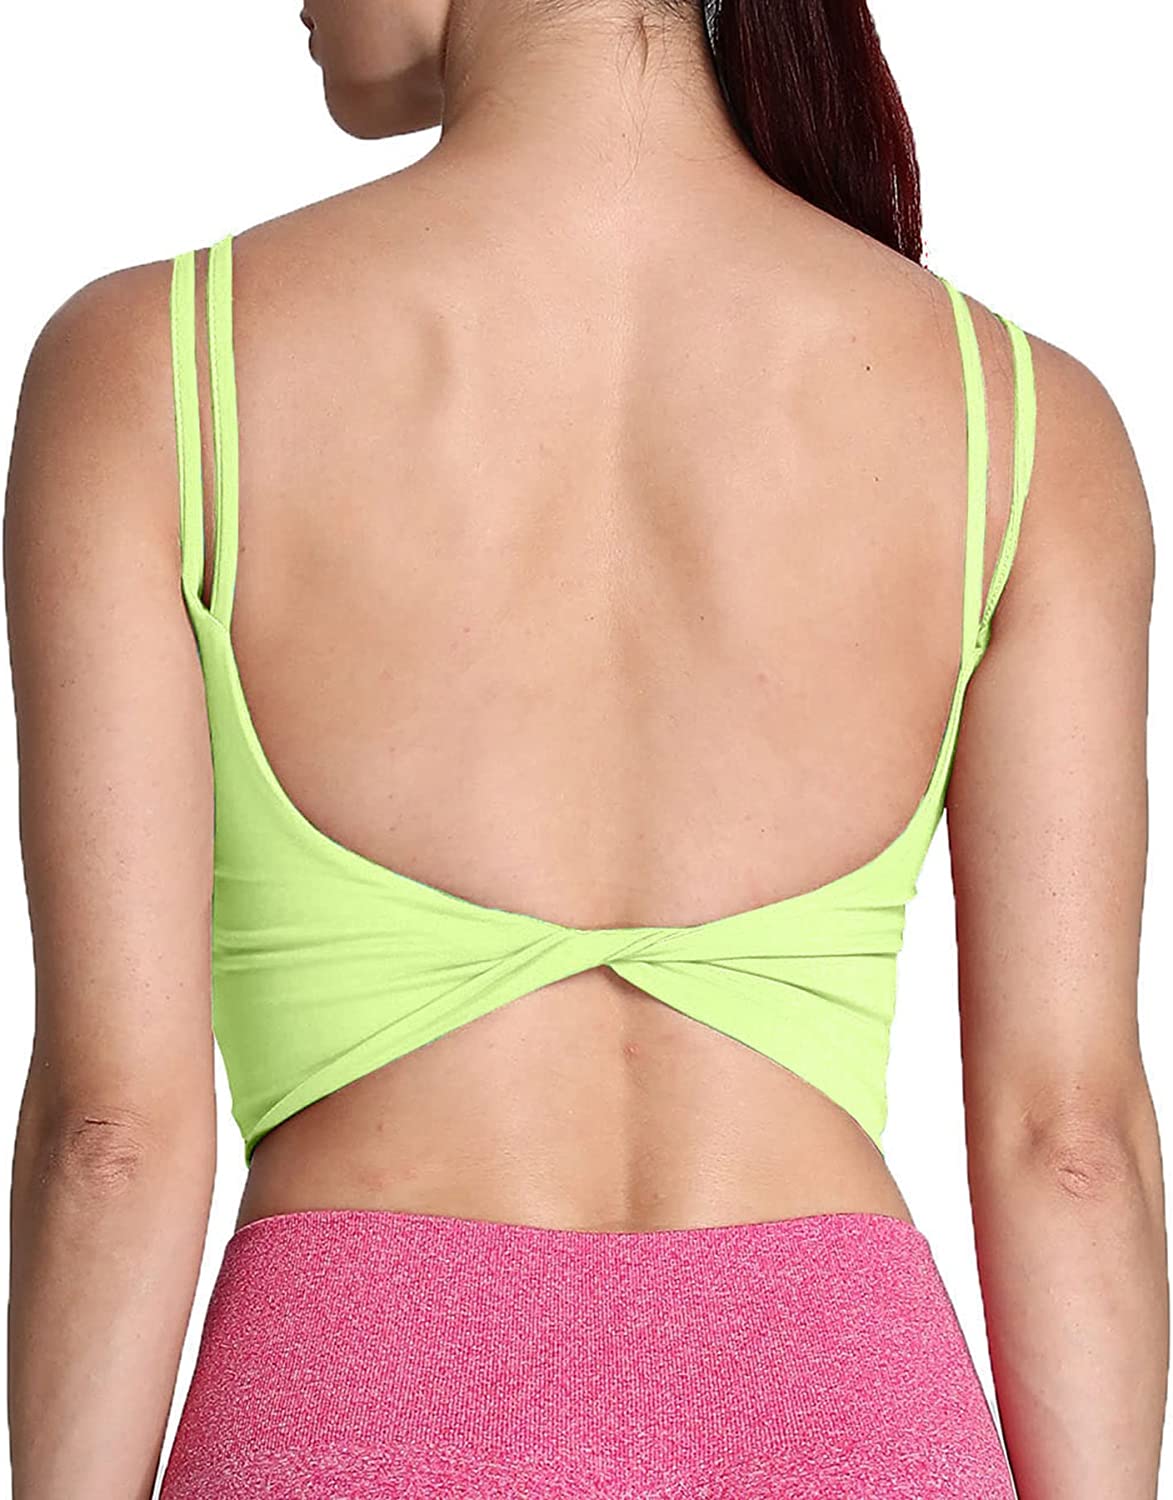 Aoxjox Women's Workout Sports Bras Fitness Backless Padded Halter